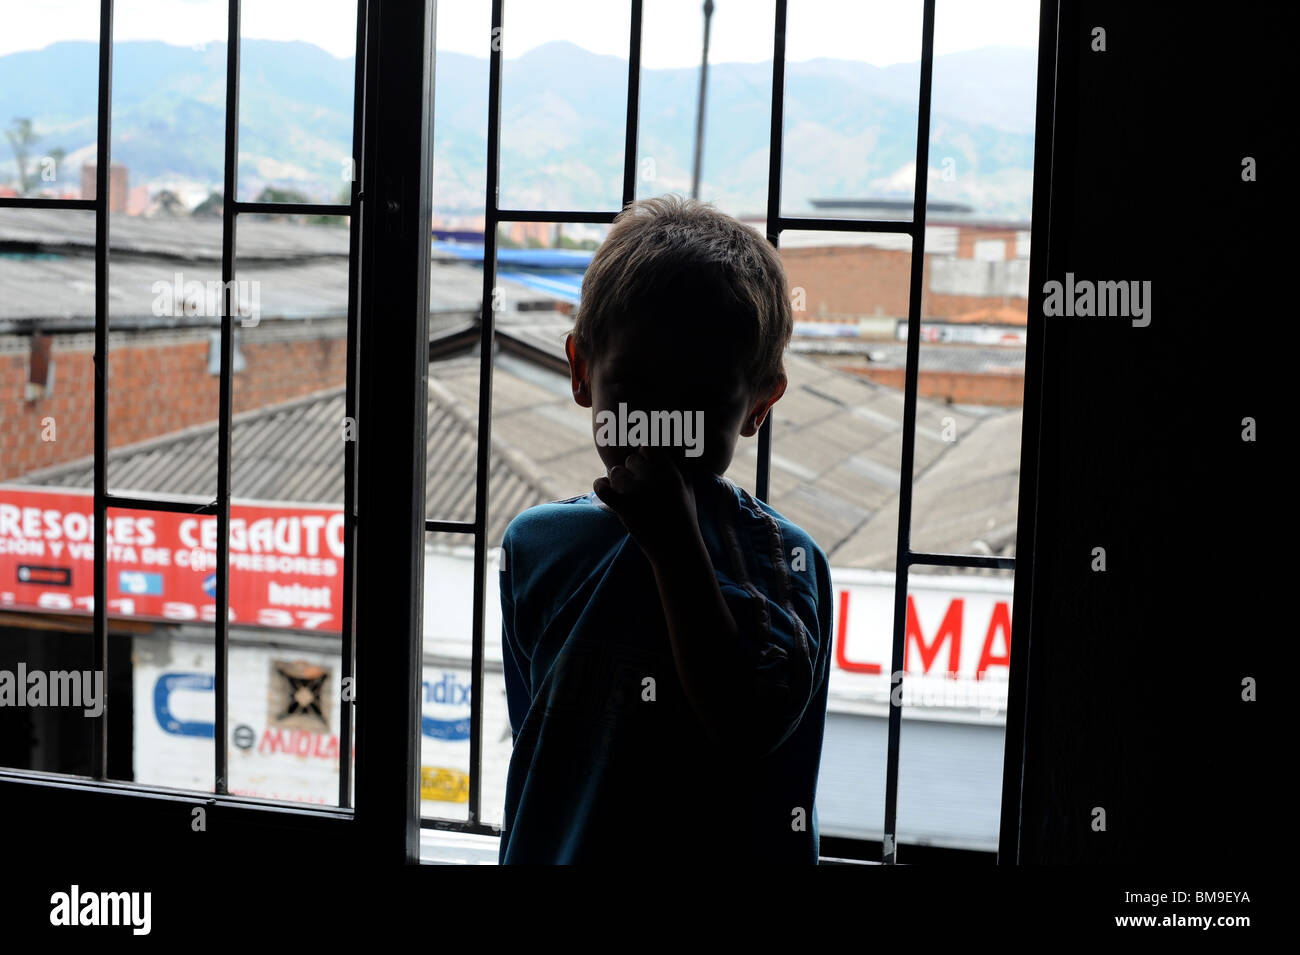 Silhouette of boy 4 years standing by window in down town building. Stock Photo